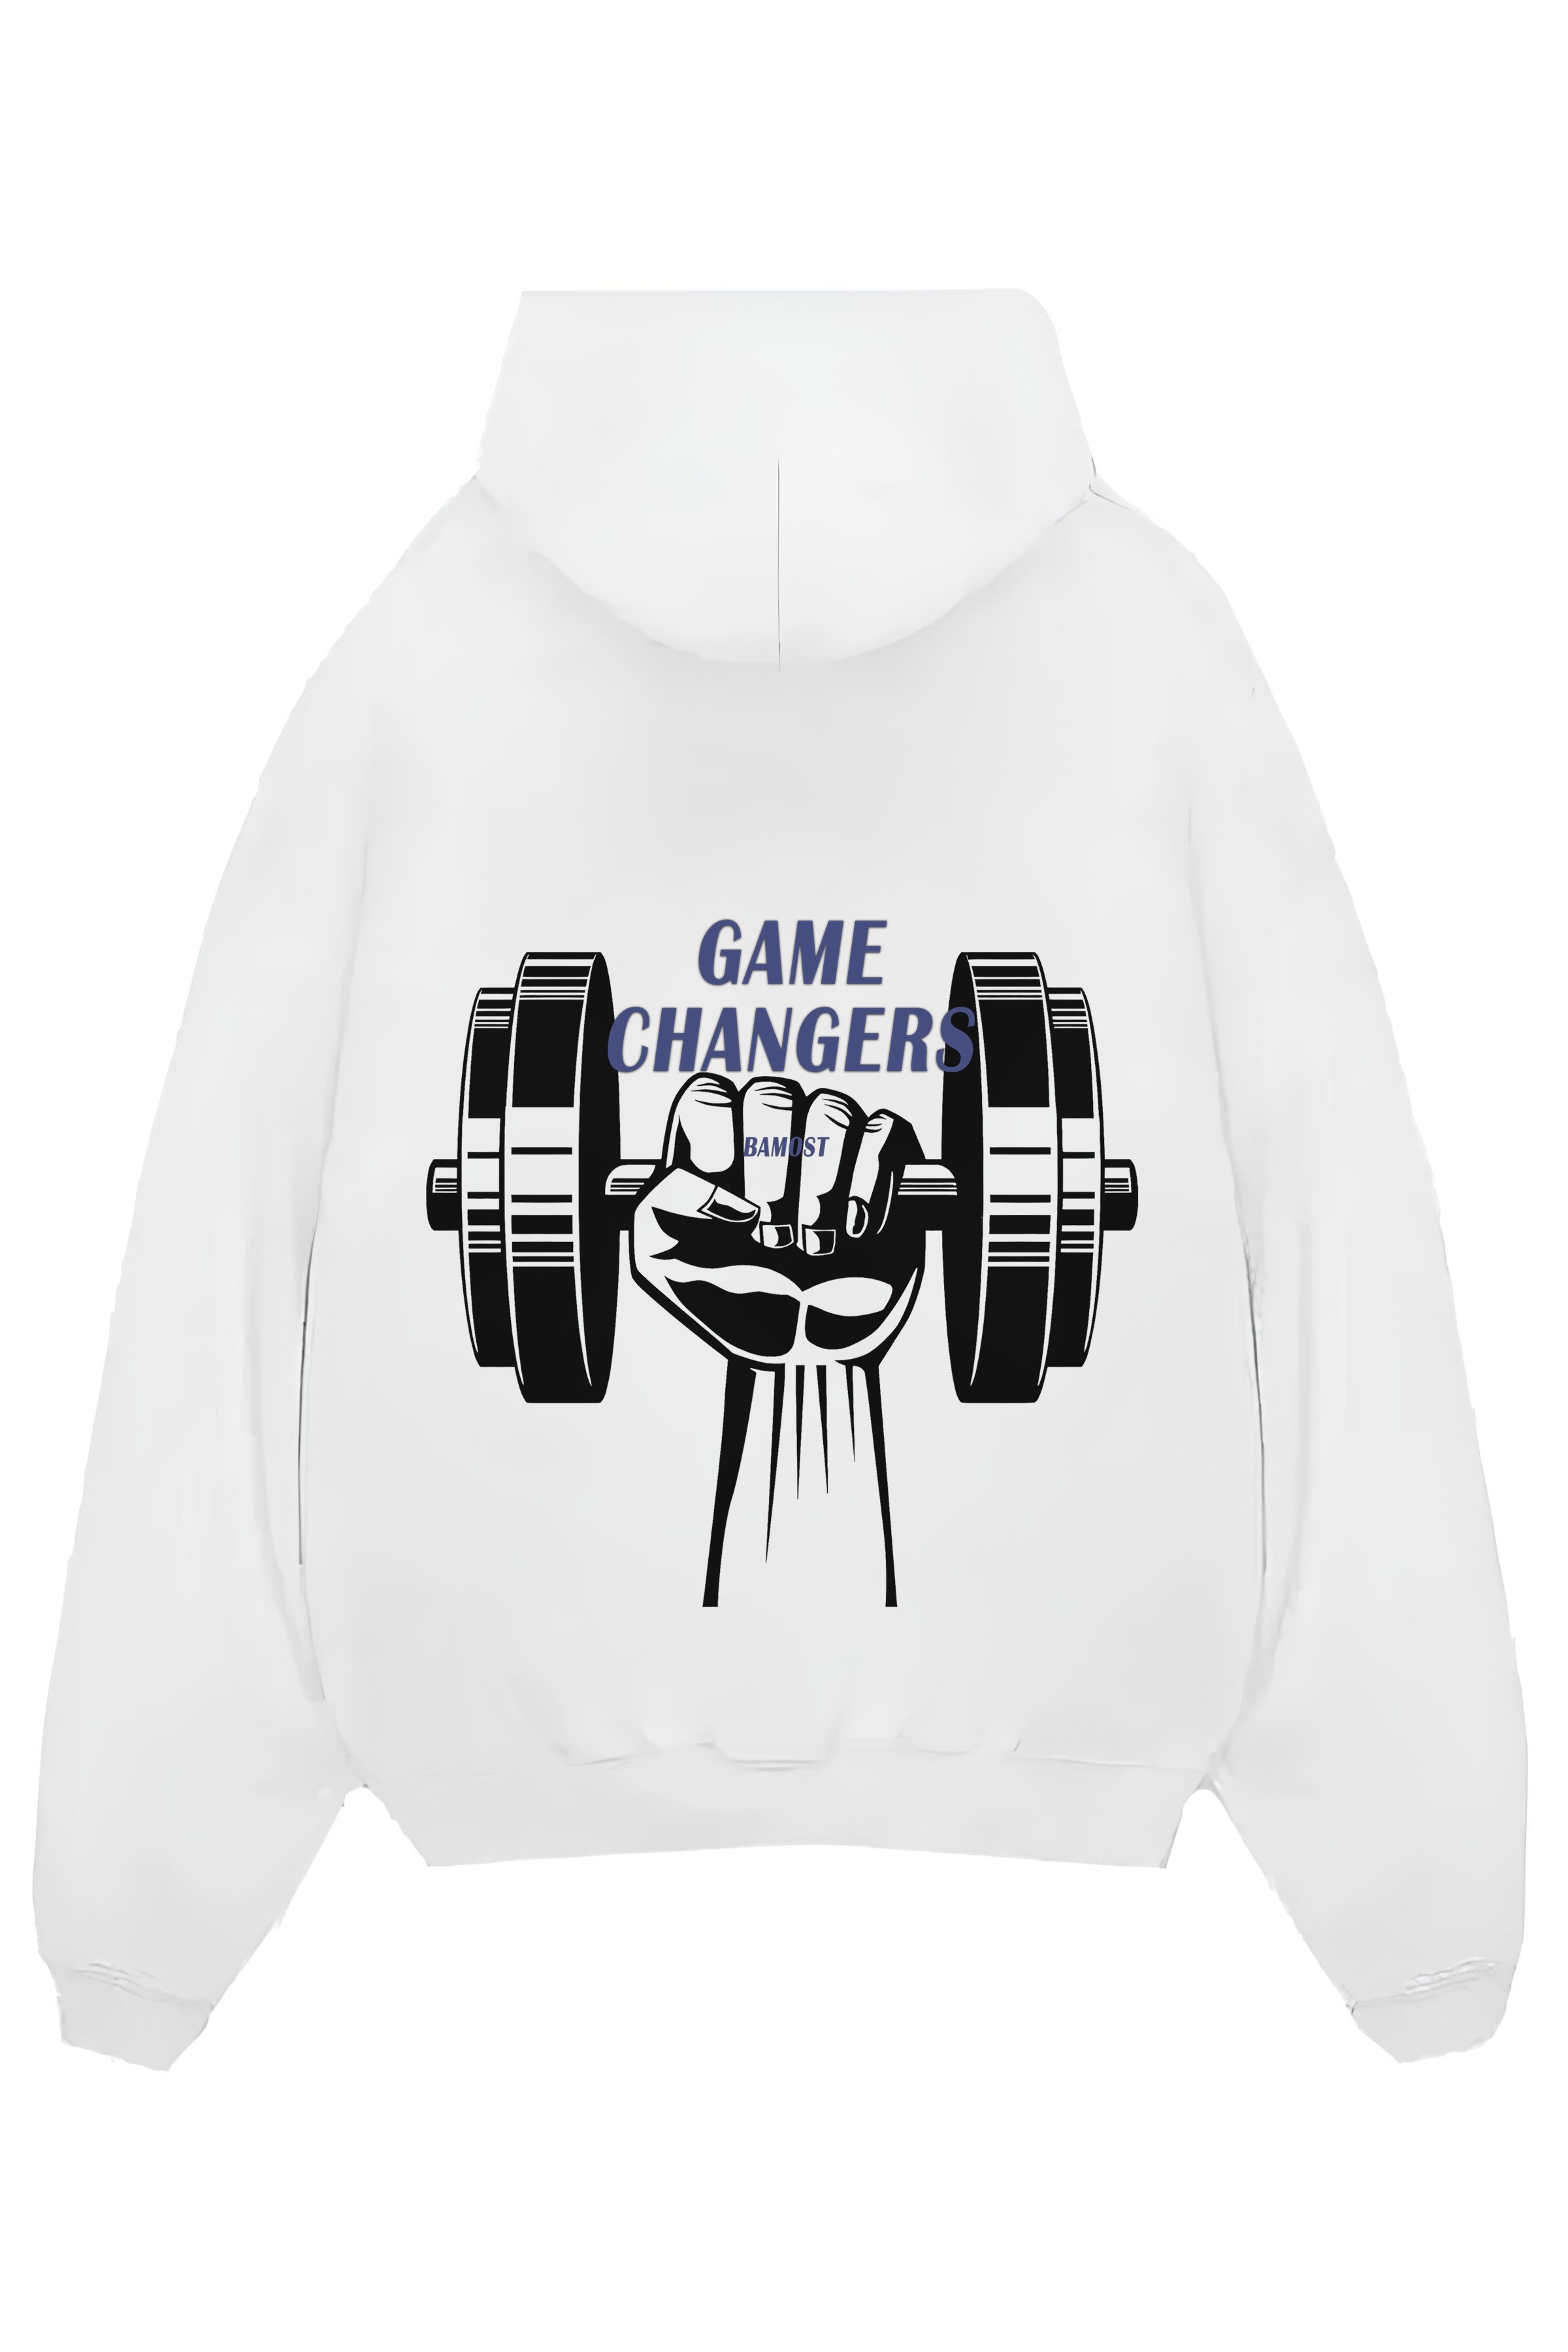 Taylor - Oversize Hoodie - WHITE